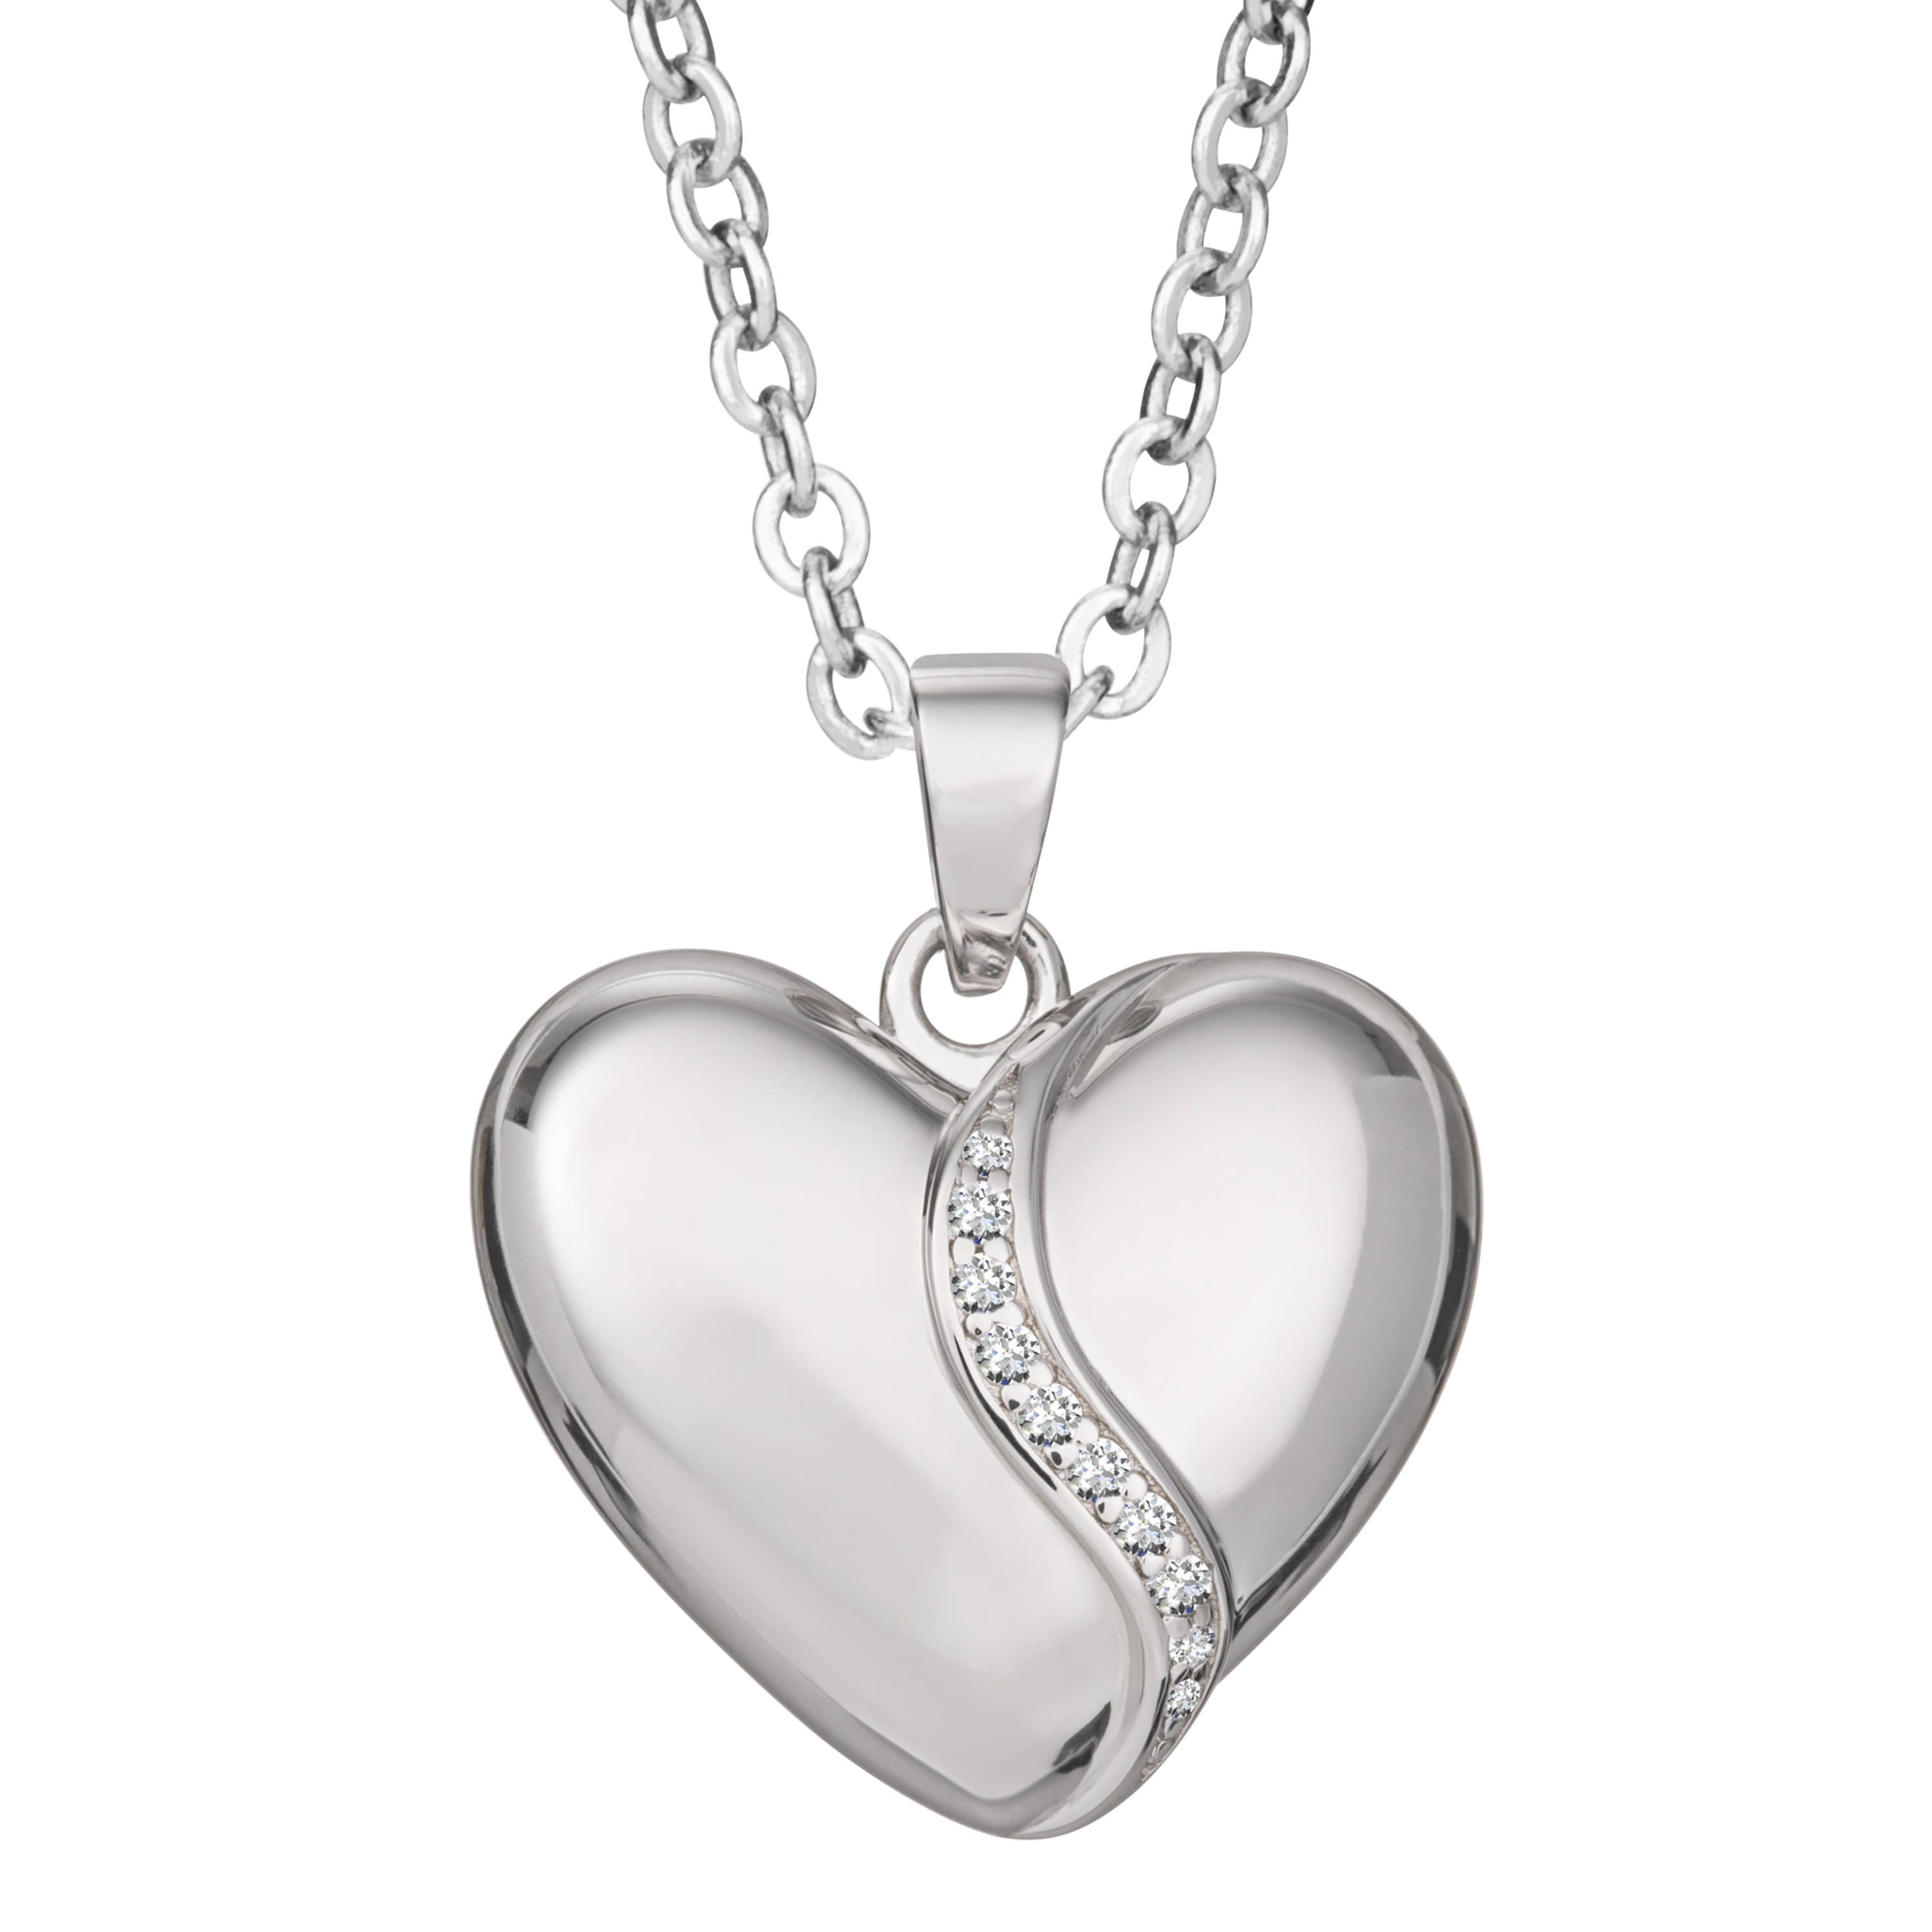 Self-fill Heart Shaped Memorial Ashes Pendant with Crystals